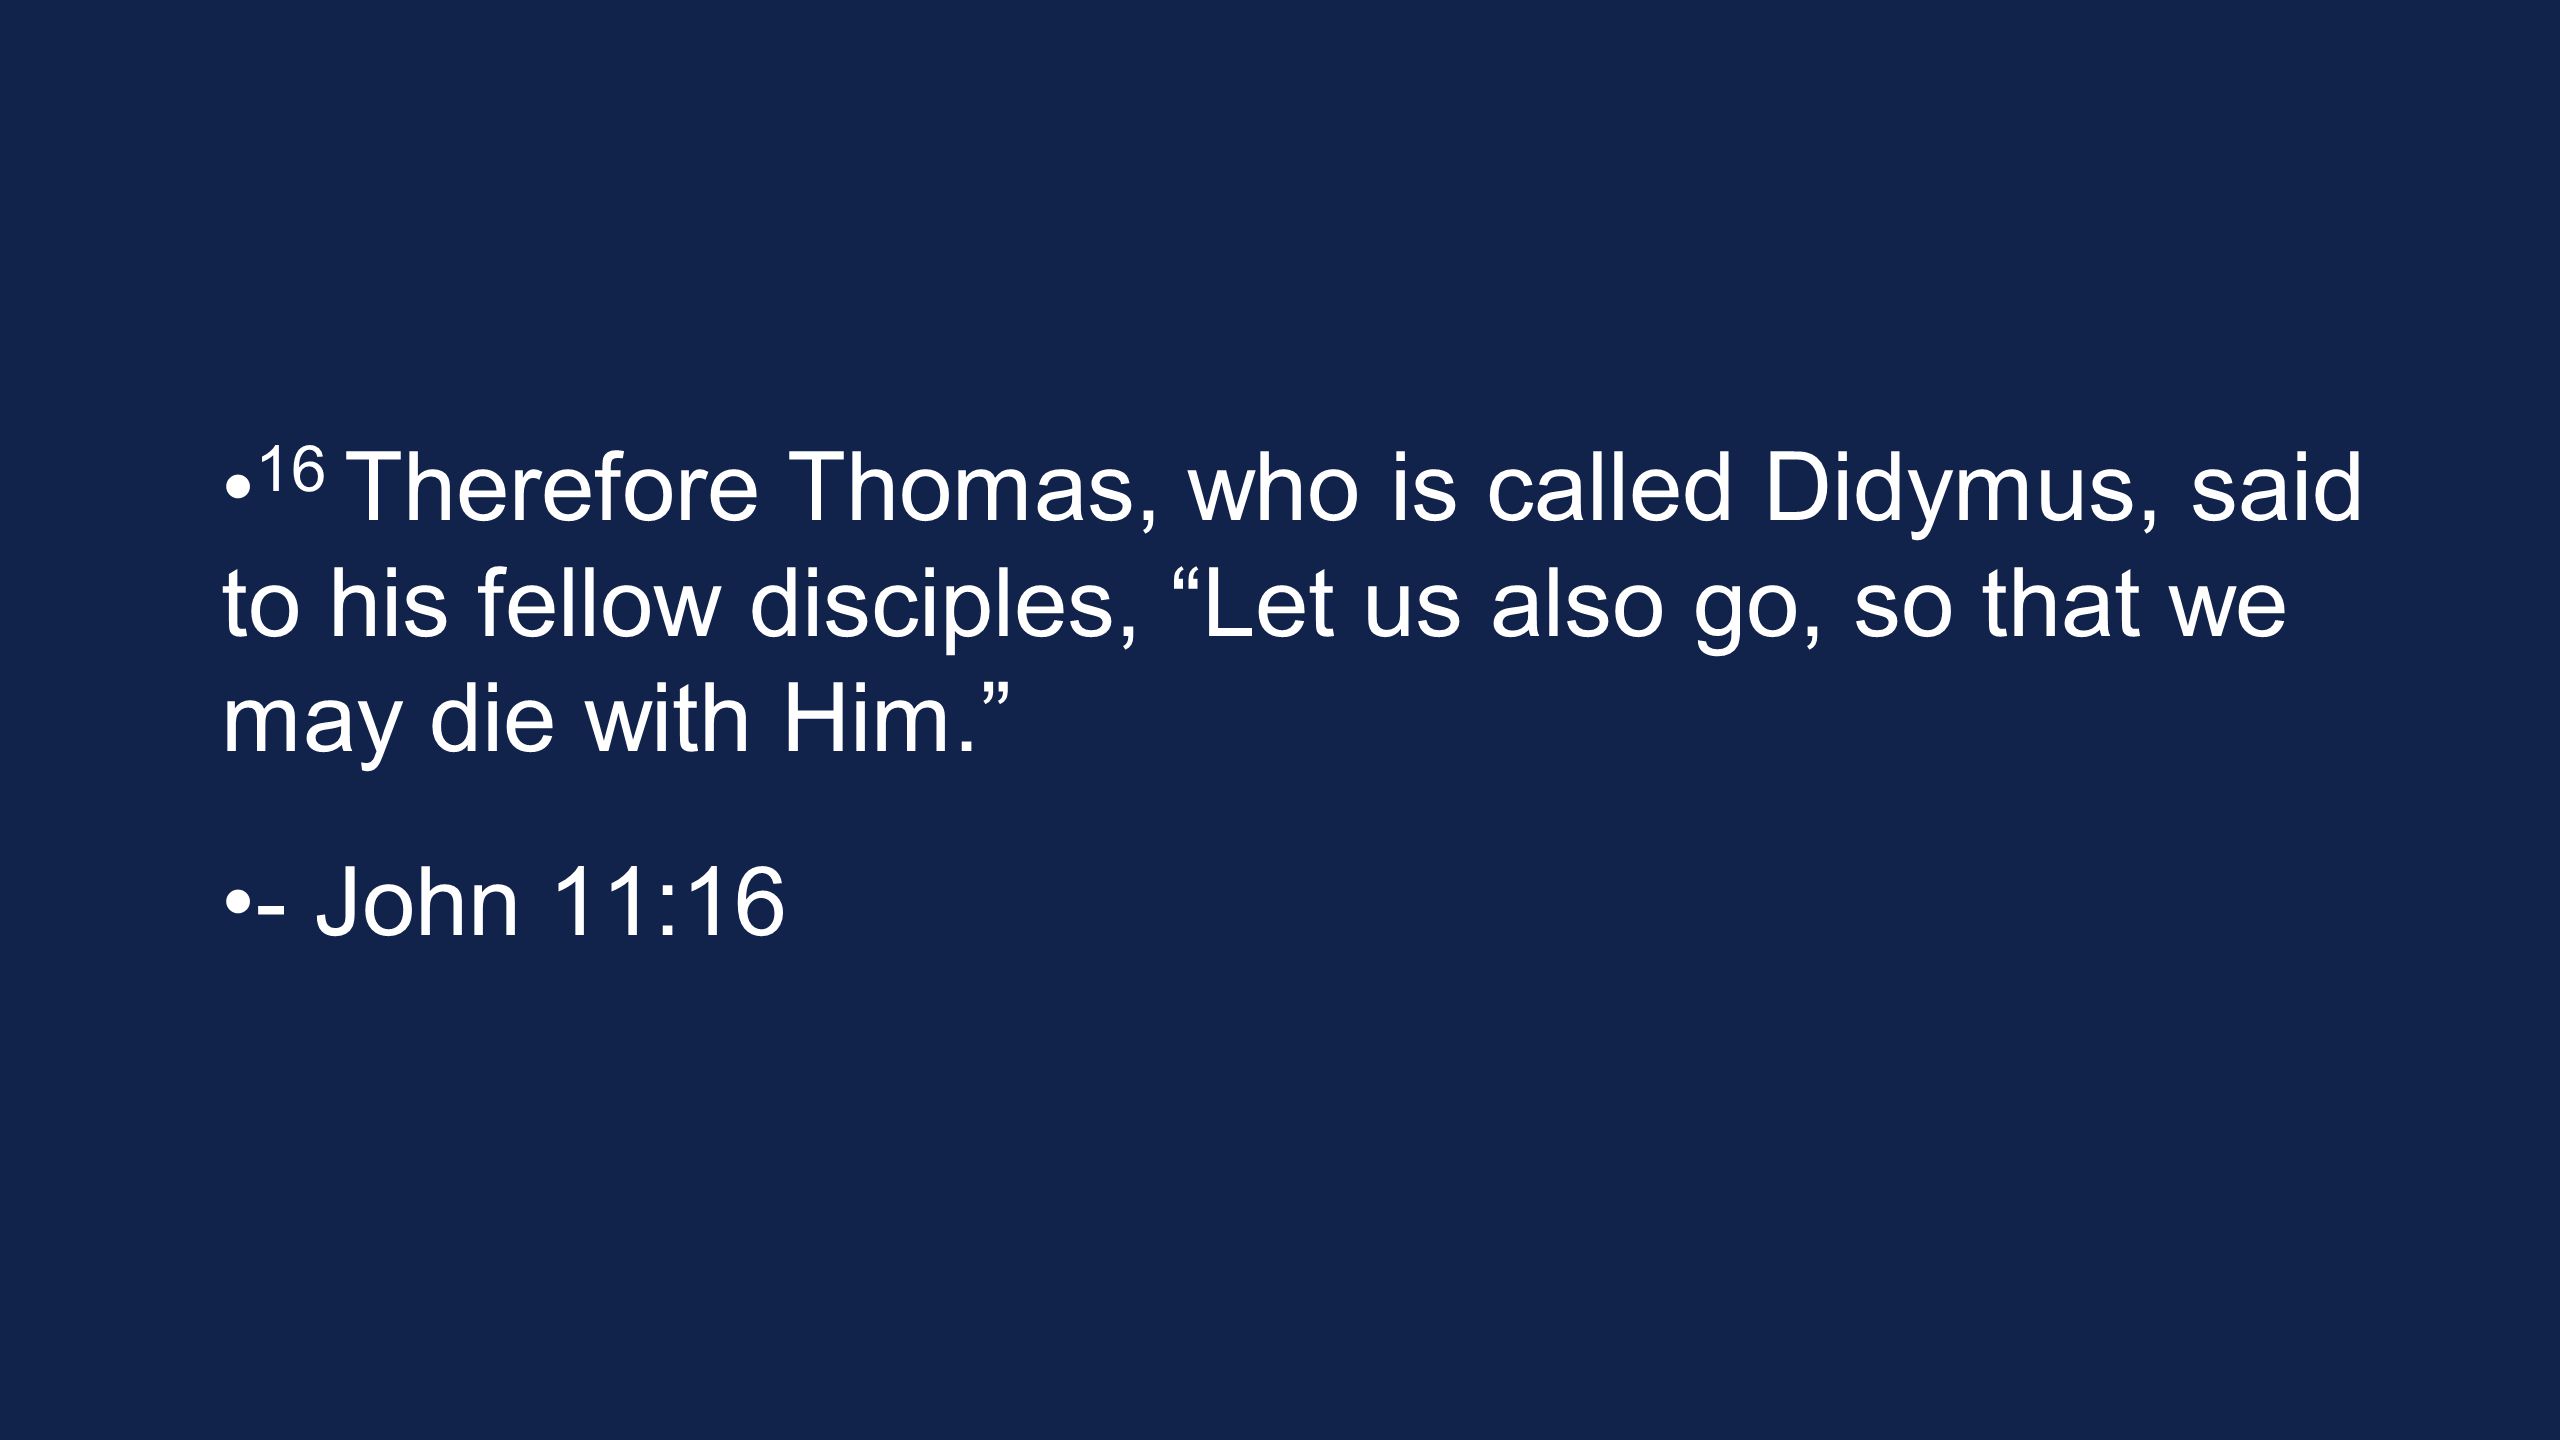 16 Therefore Thomas, who is called Didymus, said to his fellow disciples, Let us also go, so that we may die with Him. - John 11:16